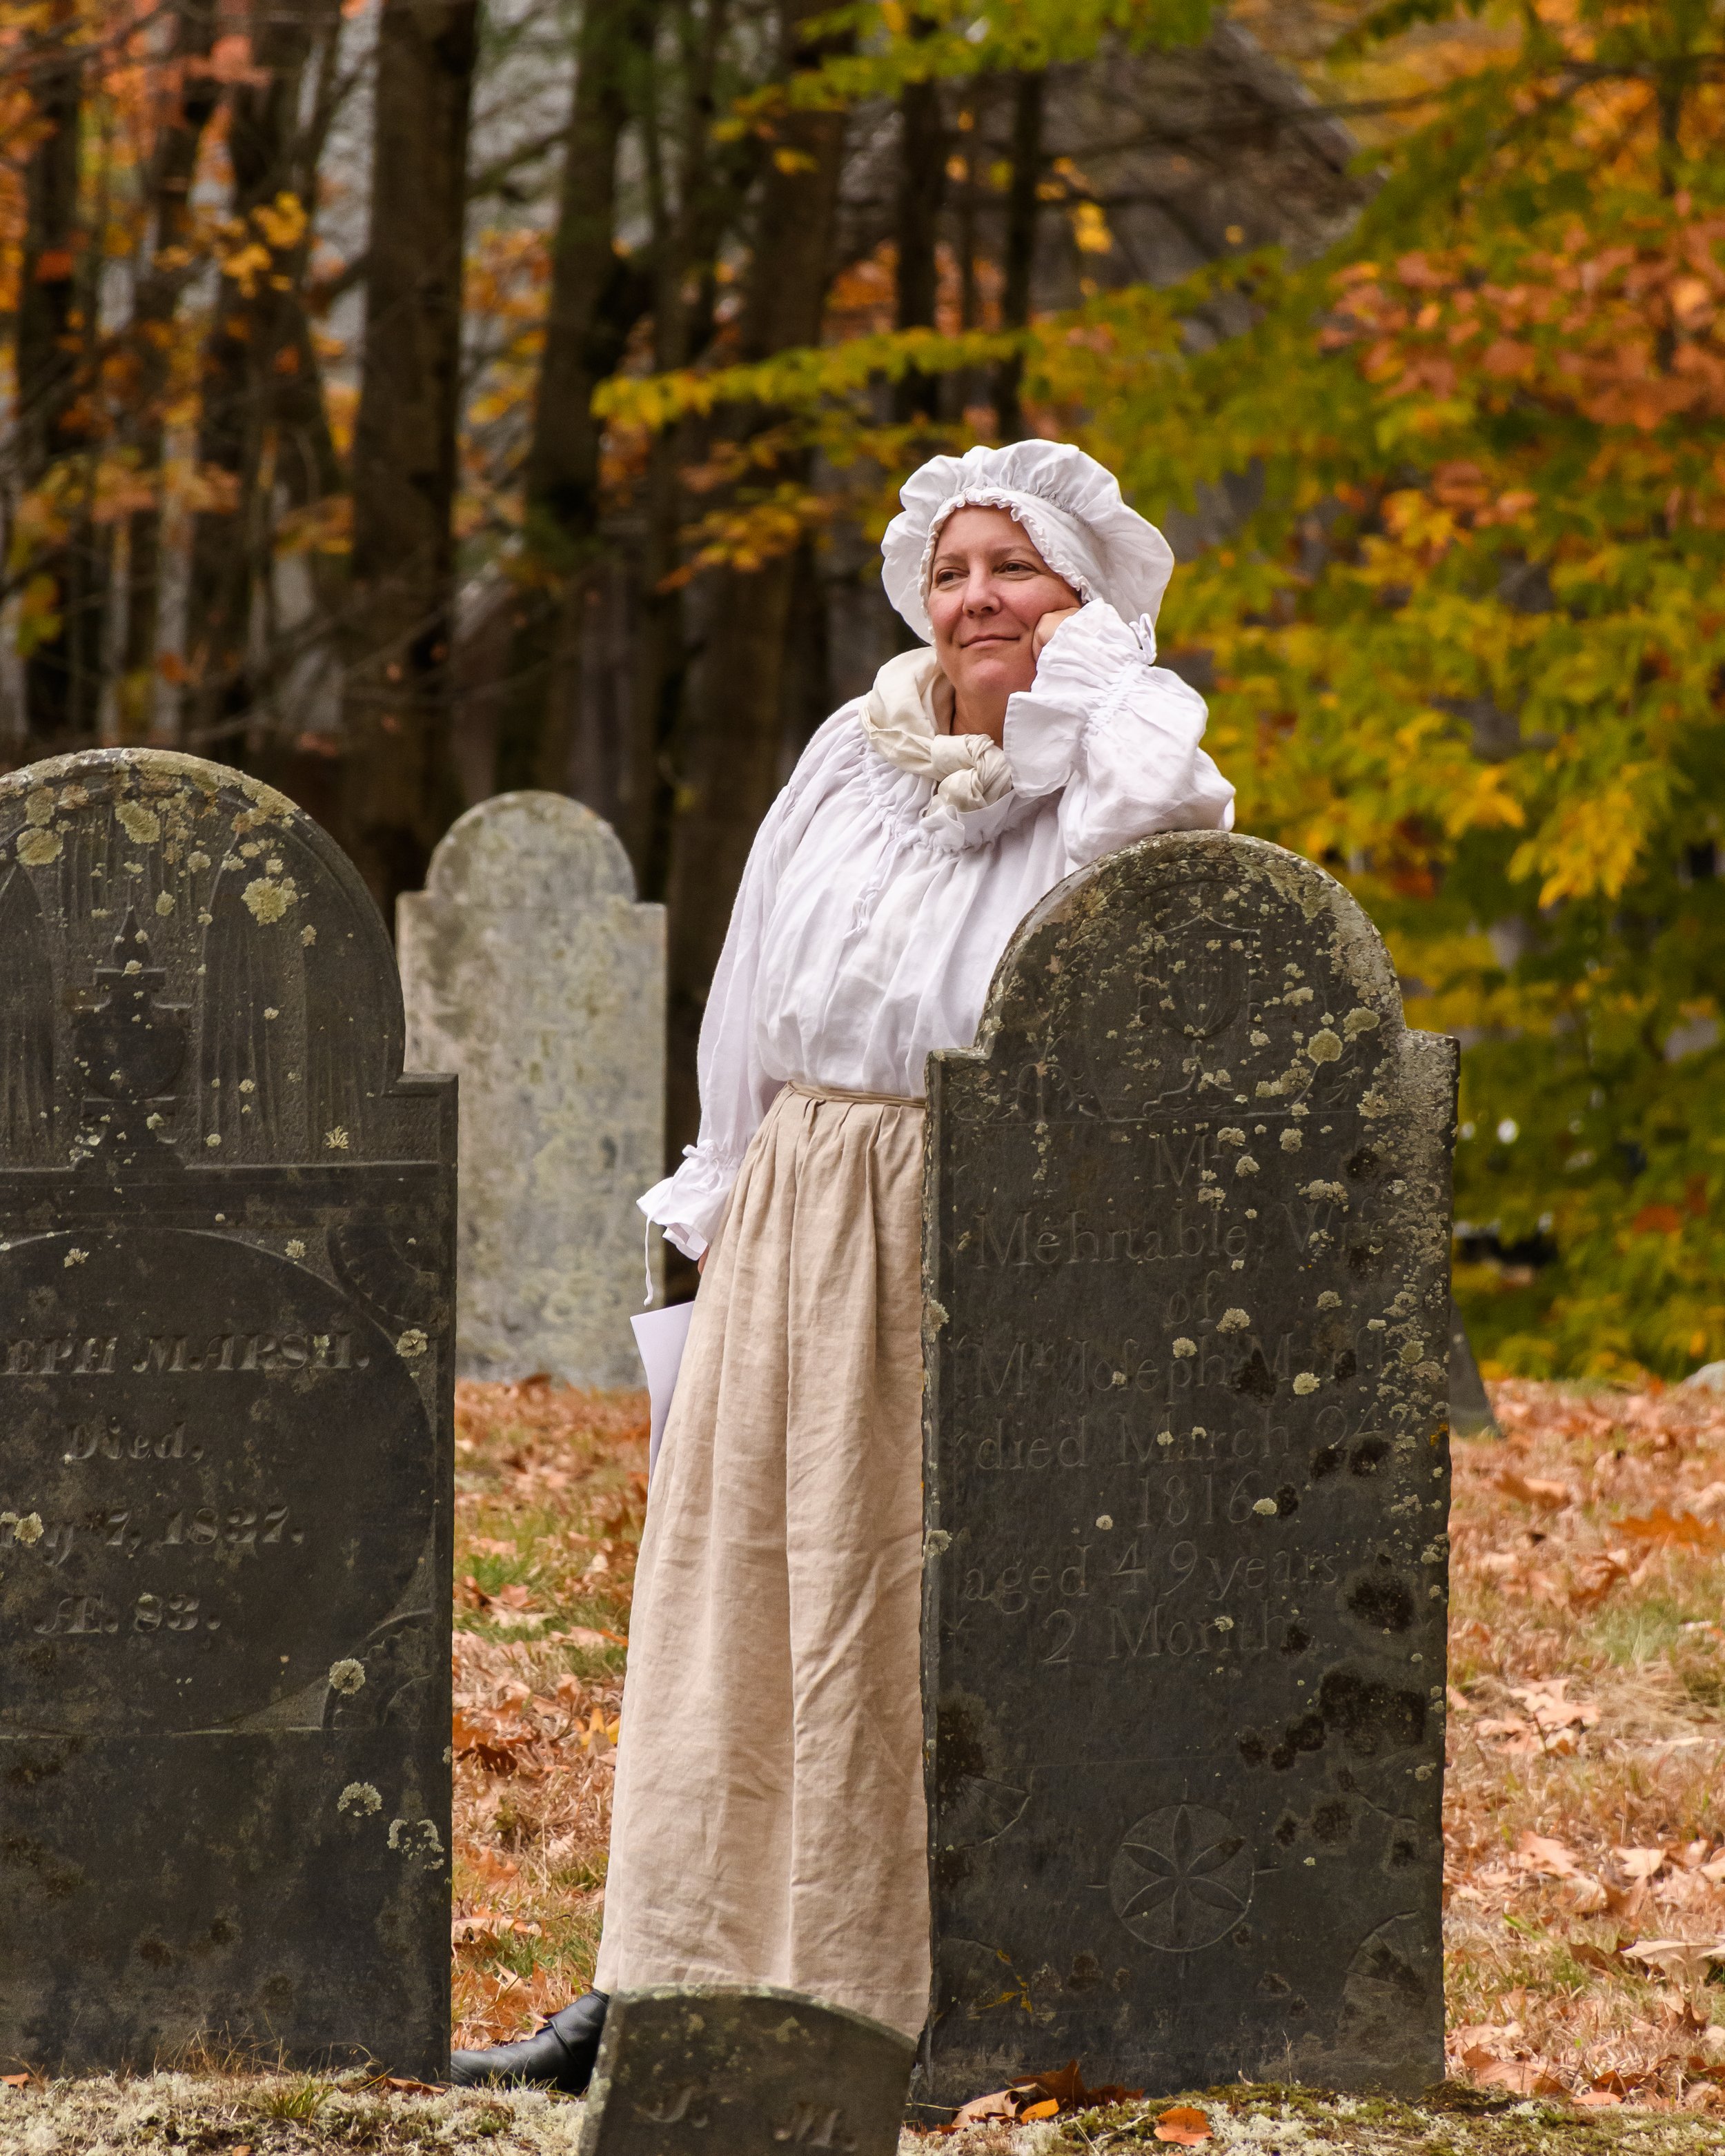  Mary Marsh (aka Kristen Maclean) awaits visitors as she ponders her fate as a farmer’s daughter. 